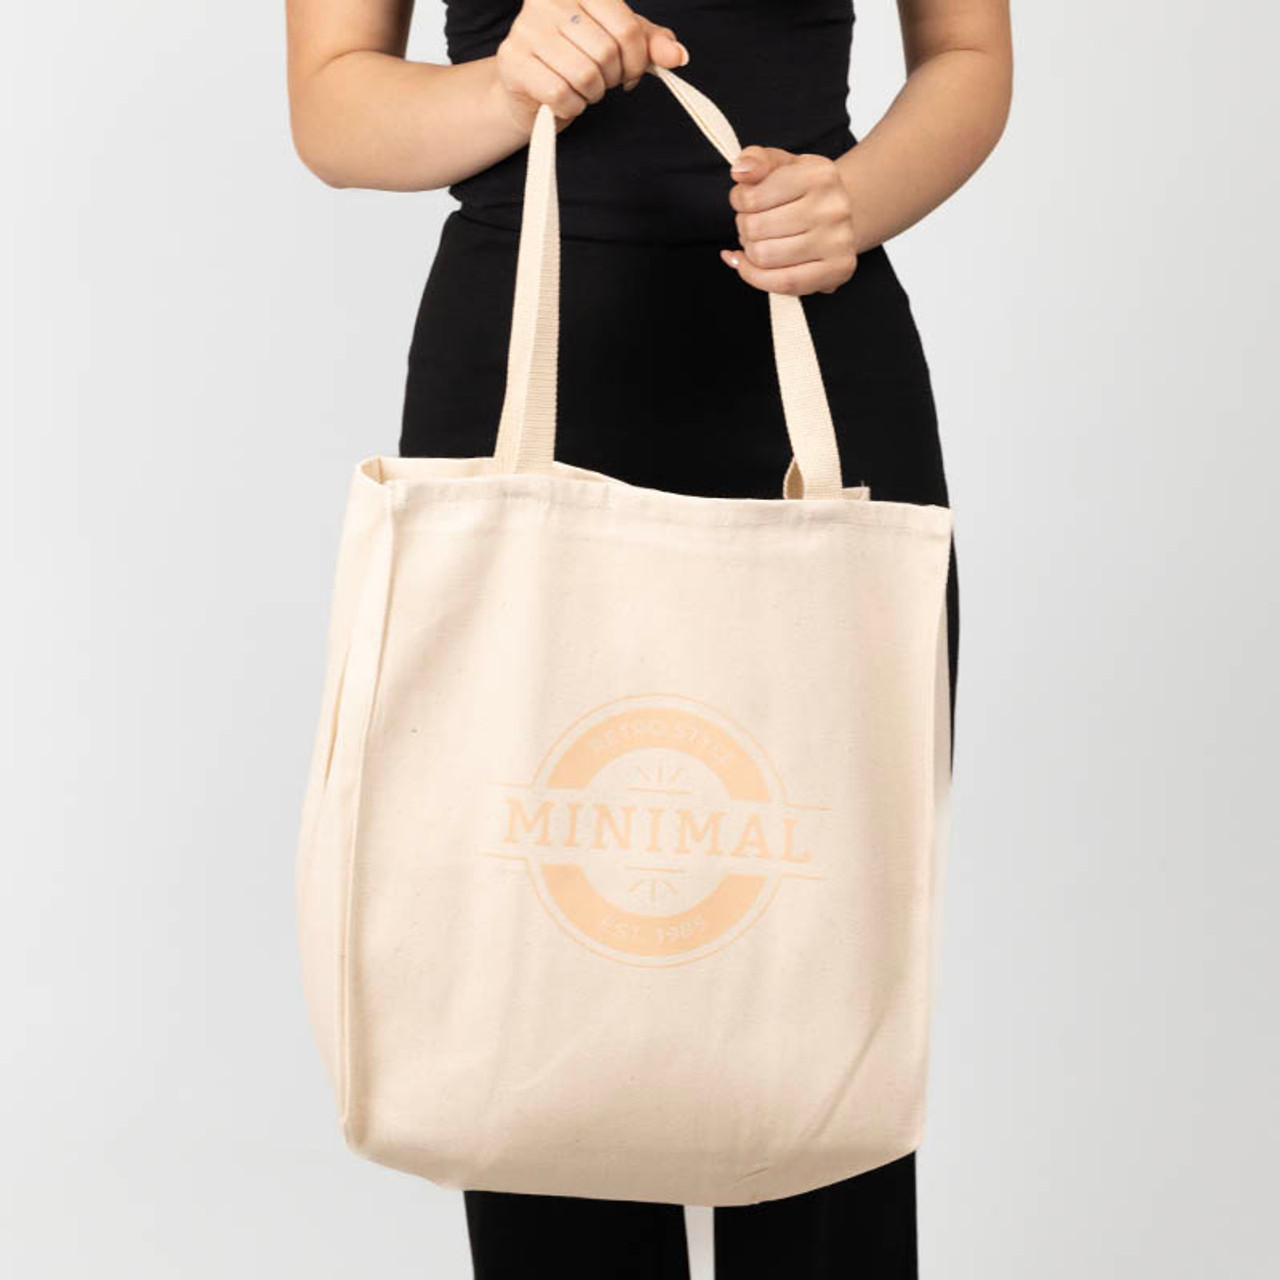 Custom Promotional Cotton Tote Bags  Cotton Totes 